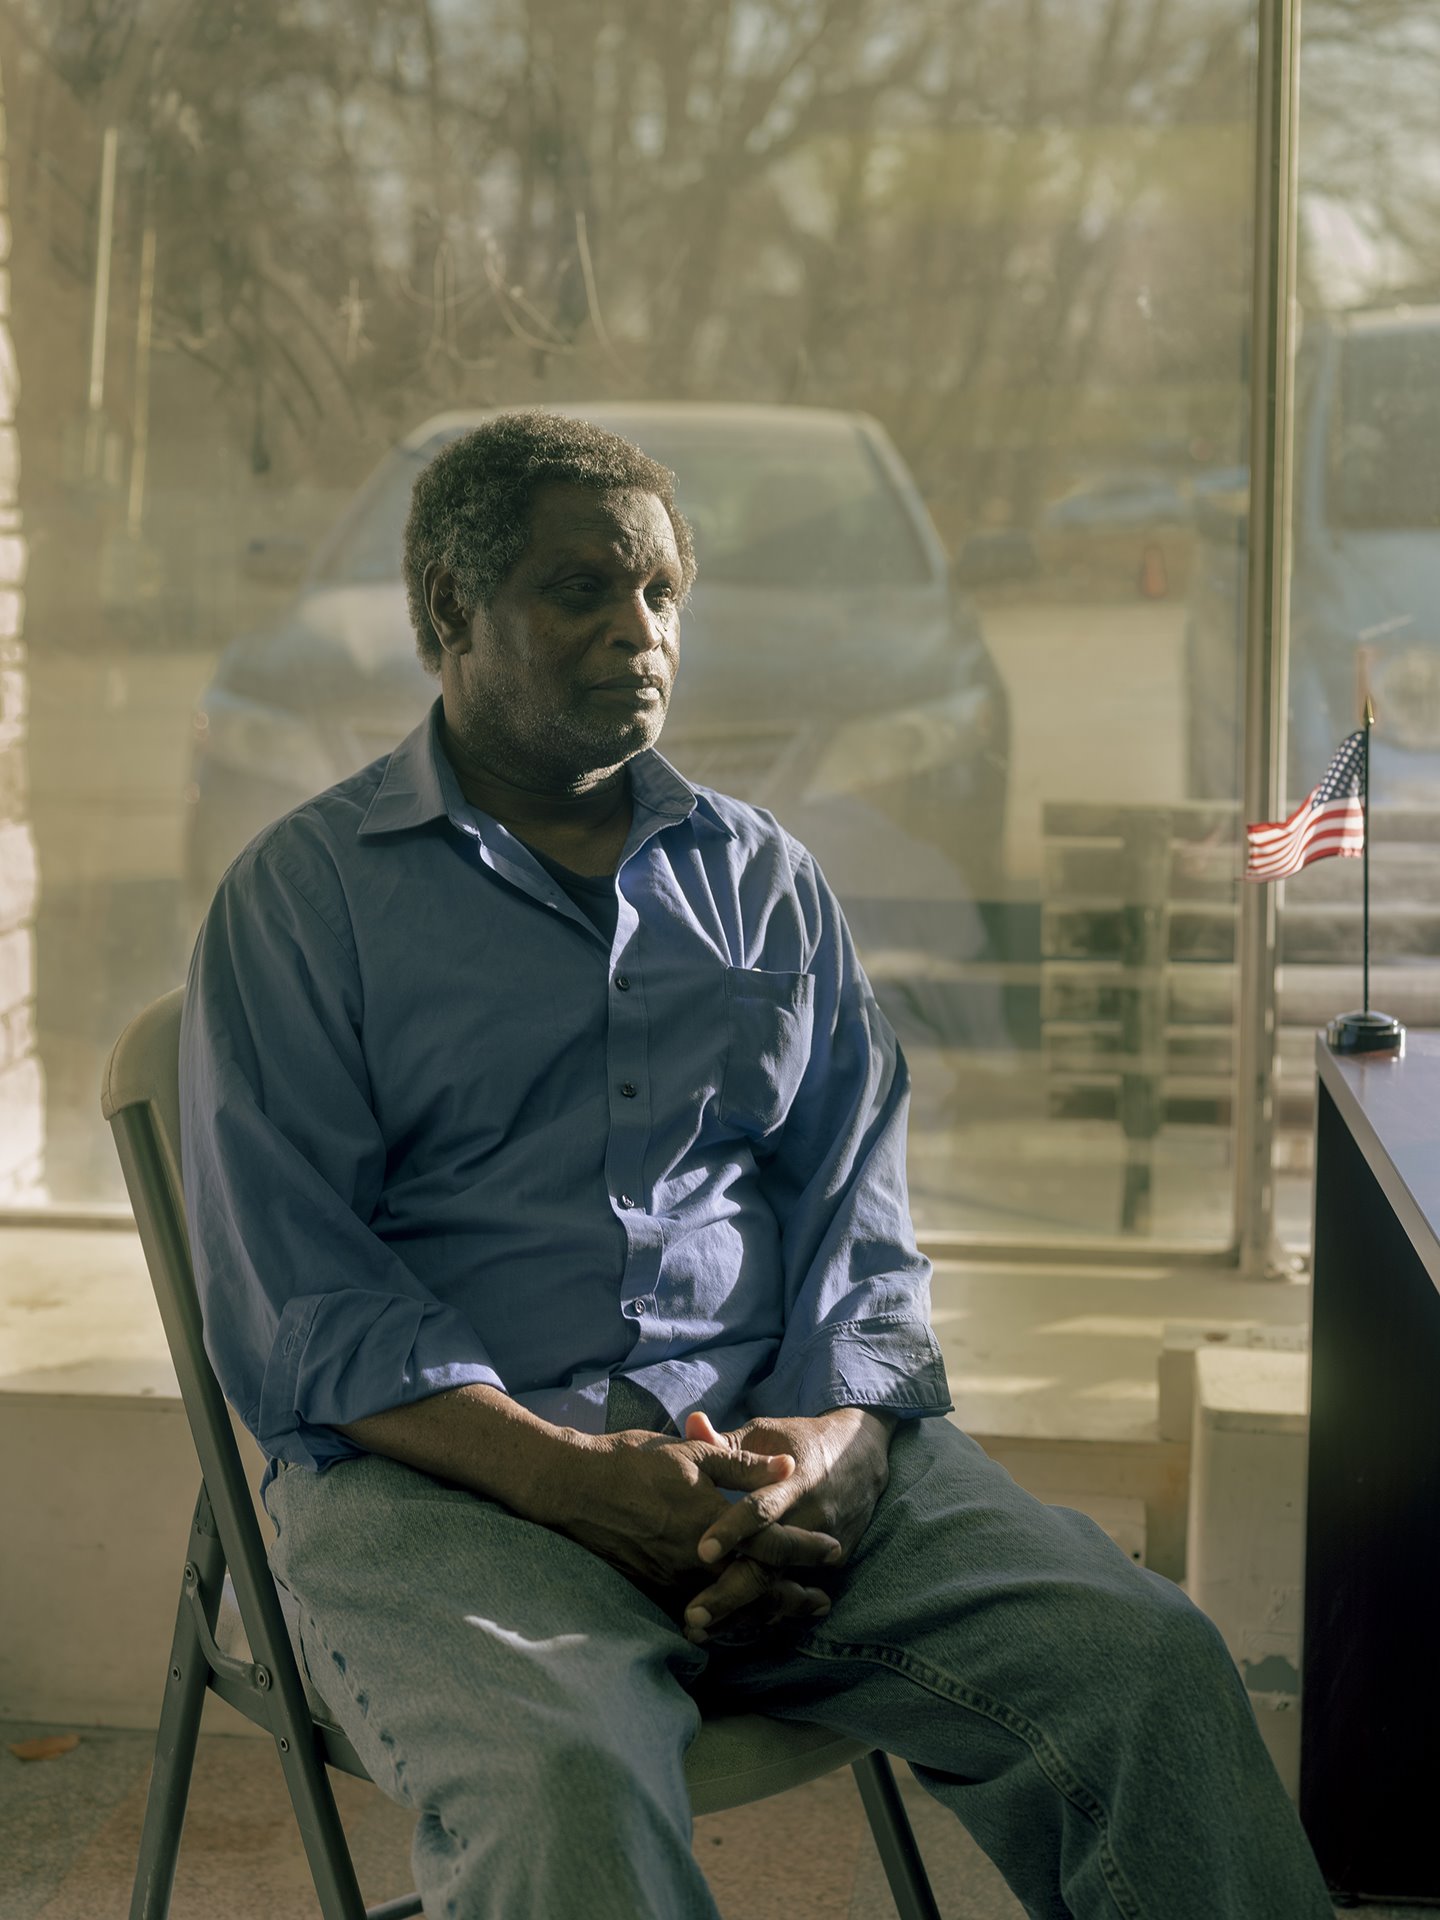 Heussein Hirsu, sits ready for a meeting at the East African Development Association of Nebraska, in Omaha, Nebraska. Originally from Somalia, he came to the US from a refugee camp in Kenya, and &nbsp;works in a meat processing plant.